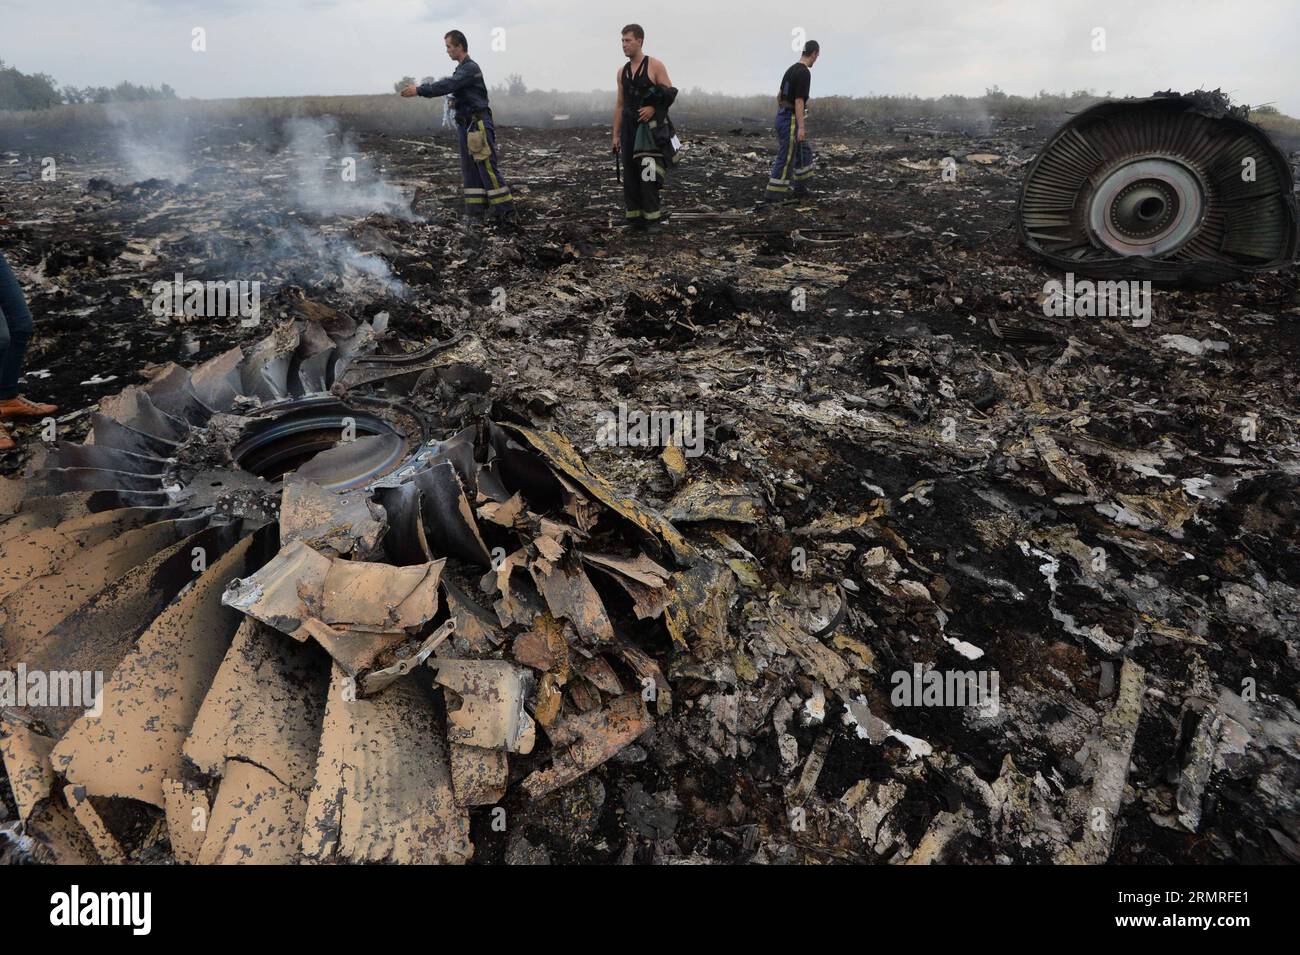 MOSCOW, July 17, 2014 (Xinhua) -- Photo taken on July 17, 2014 shows the debris at the crash site of a passenger plane near the village of Grabovo, Ukraine. A Malaysian flight crashed Thursday in eastern Ukraine near the Russian border, with all the 280 passengers and 15 crew members on board reportedly having been killed. (Xinhua/RIA Novosti) UKRAINE-PLANE-CRASH PUBLICATIONxNOTxINxCHN   Moscow July 17 2014 XINHUA Photo Taken ON July 17 2014 Shows The debris AT The Crash Site of a Passenger Plane Near The Village of  Ukraine a Malaysian Flight Crashed Thursday in Eastern Ukraine Near The Russi Stock Photo